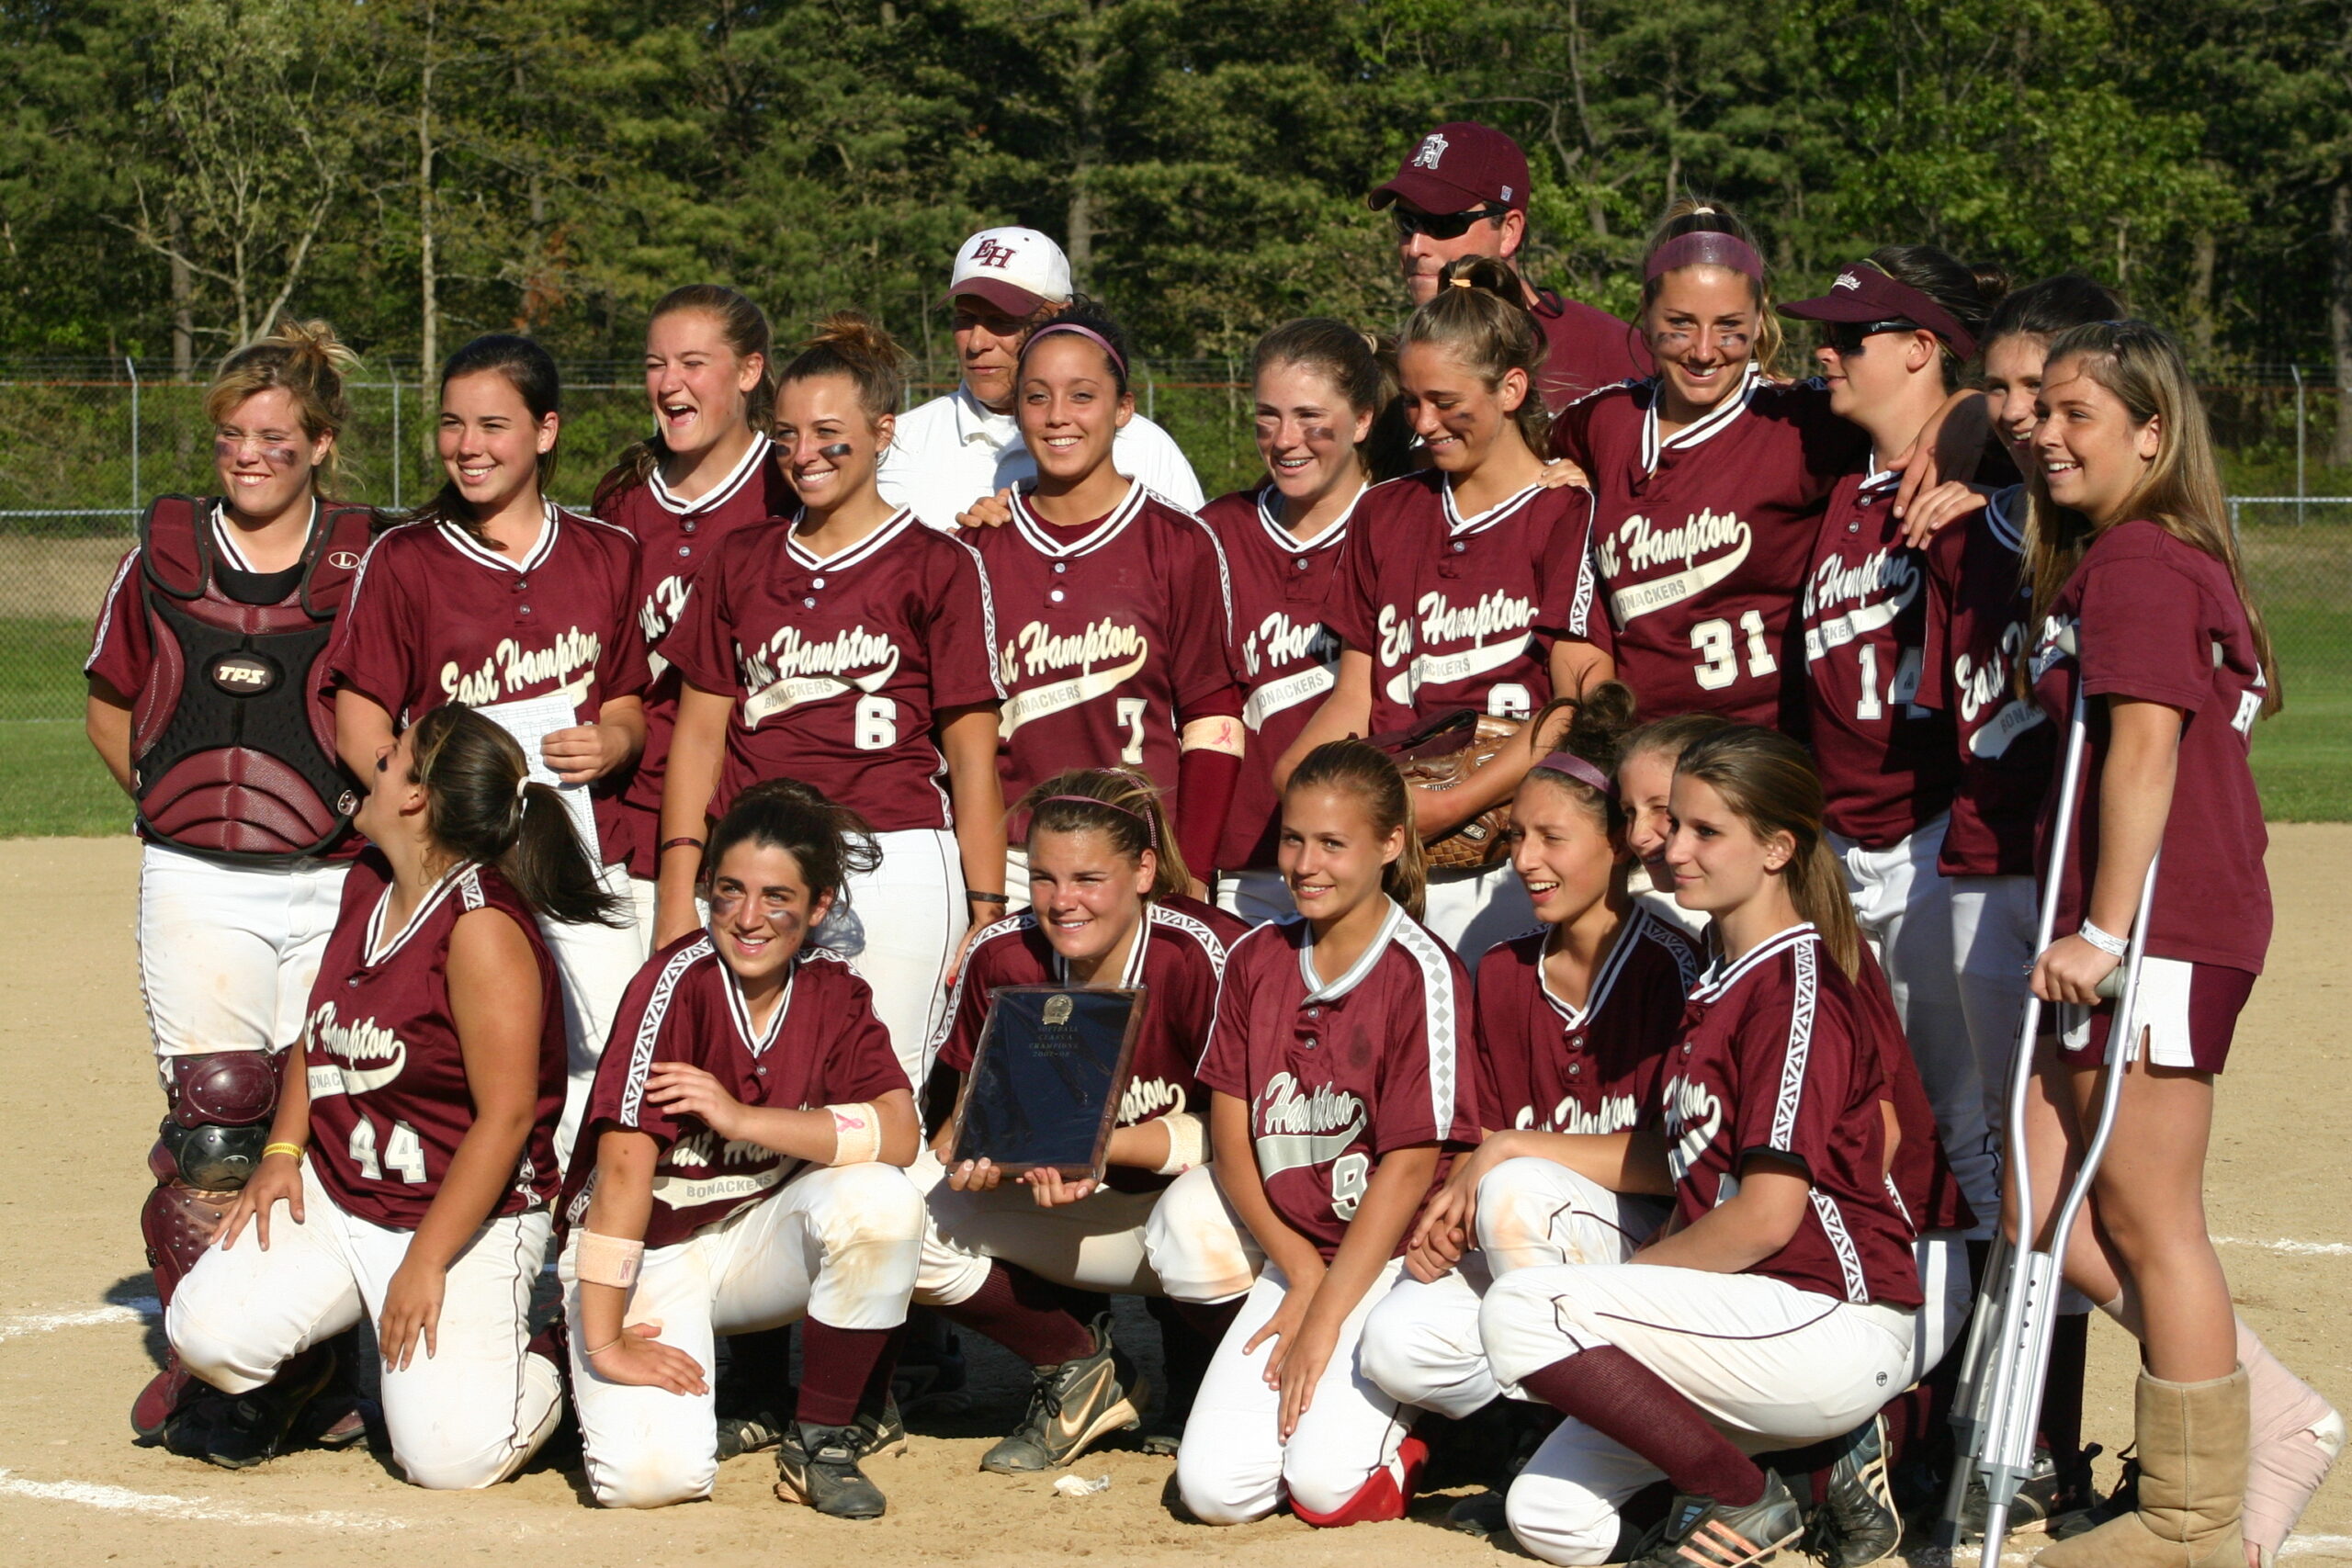 The East Hampton softball team made a run to the state tournament in 2008. EXPRESS ARCHIVES